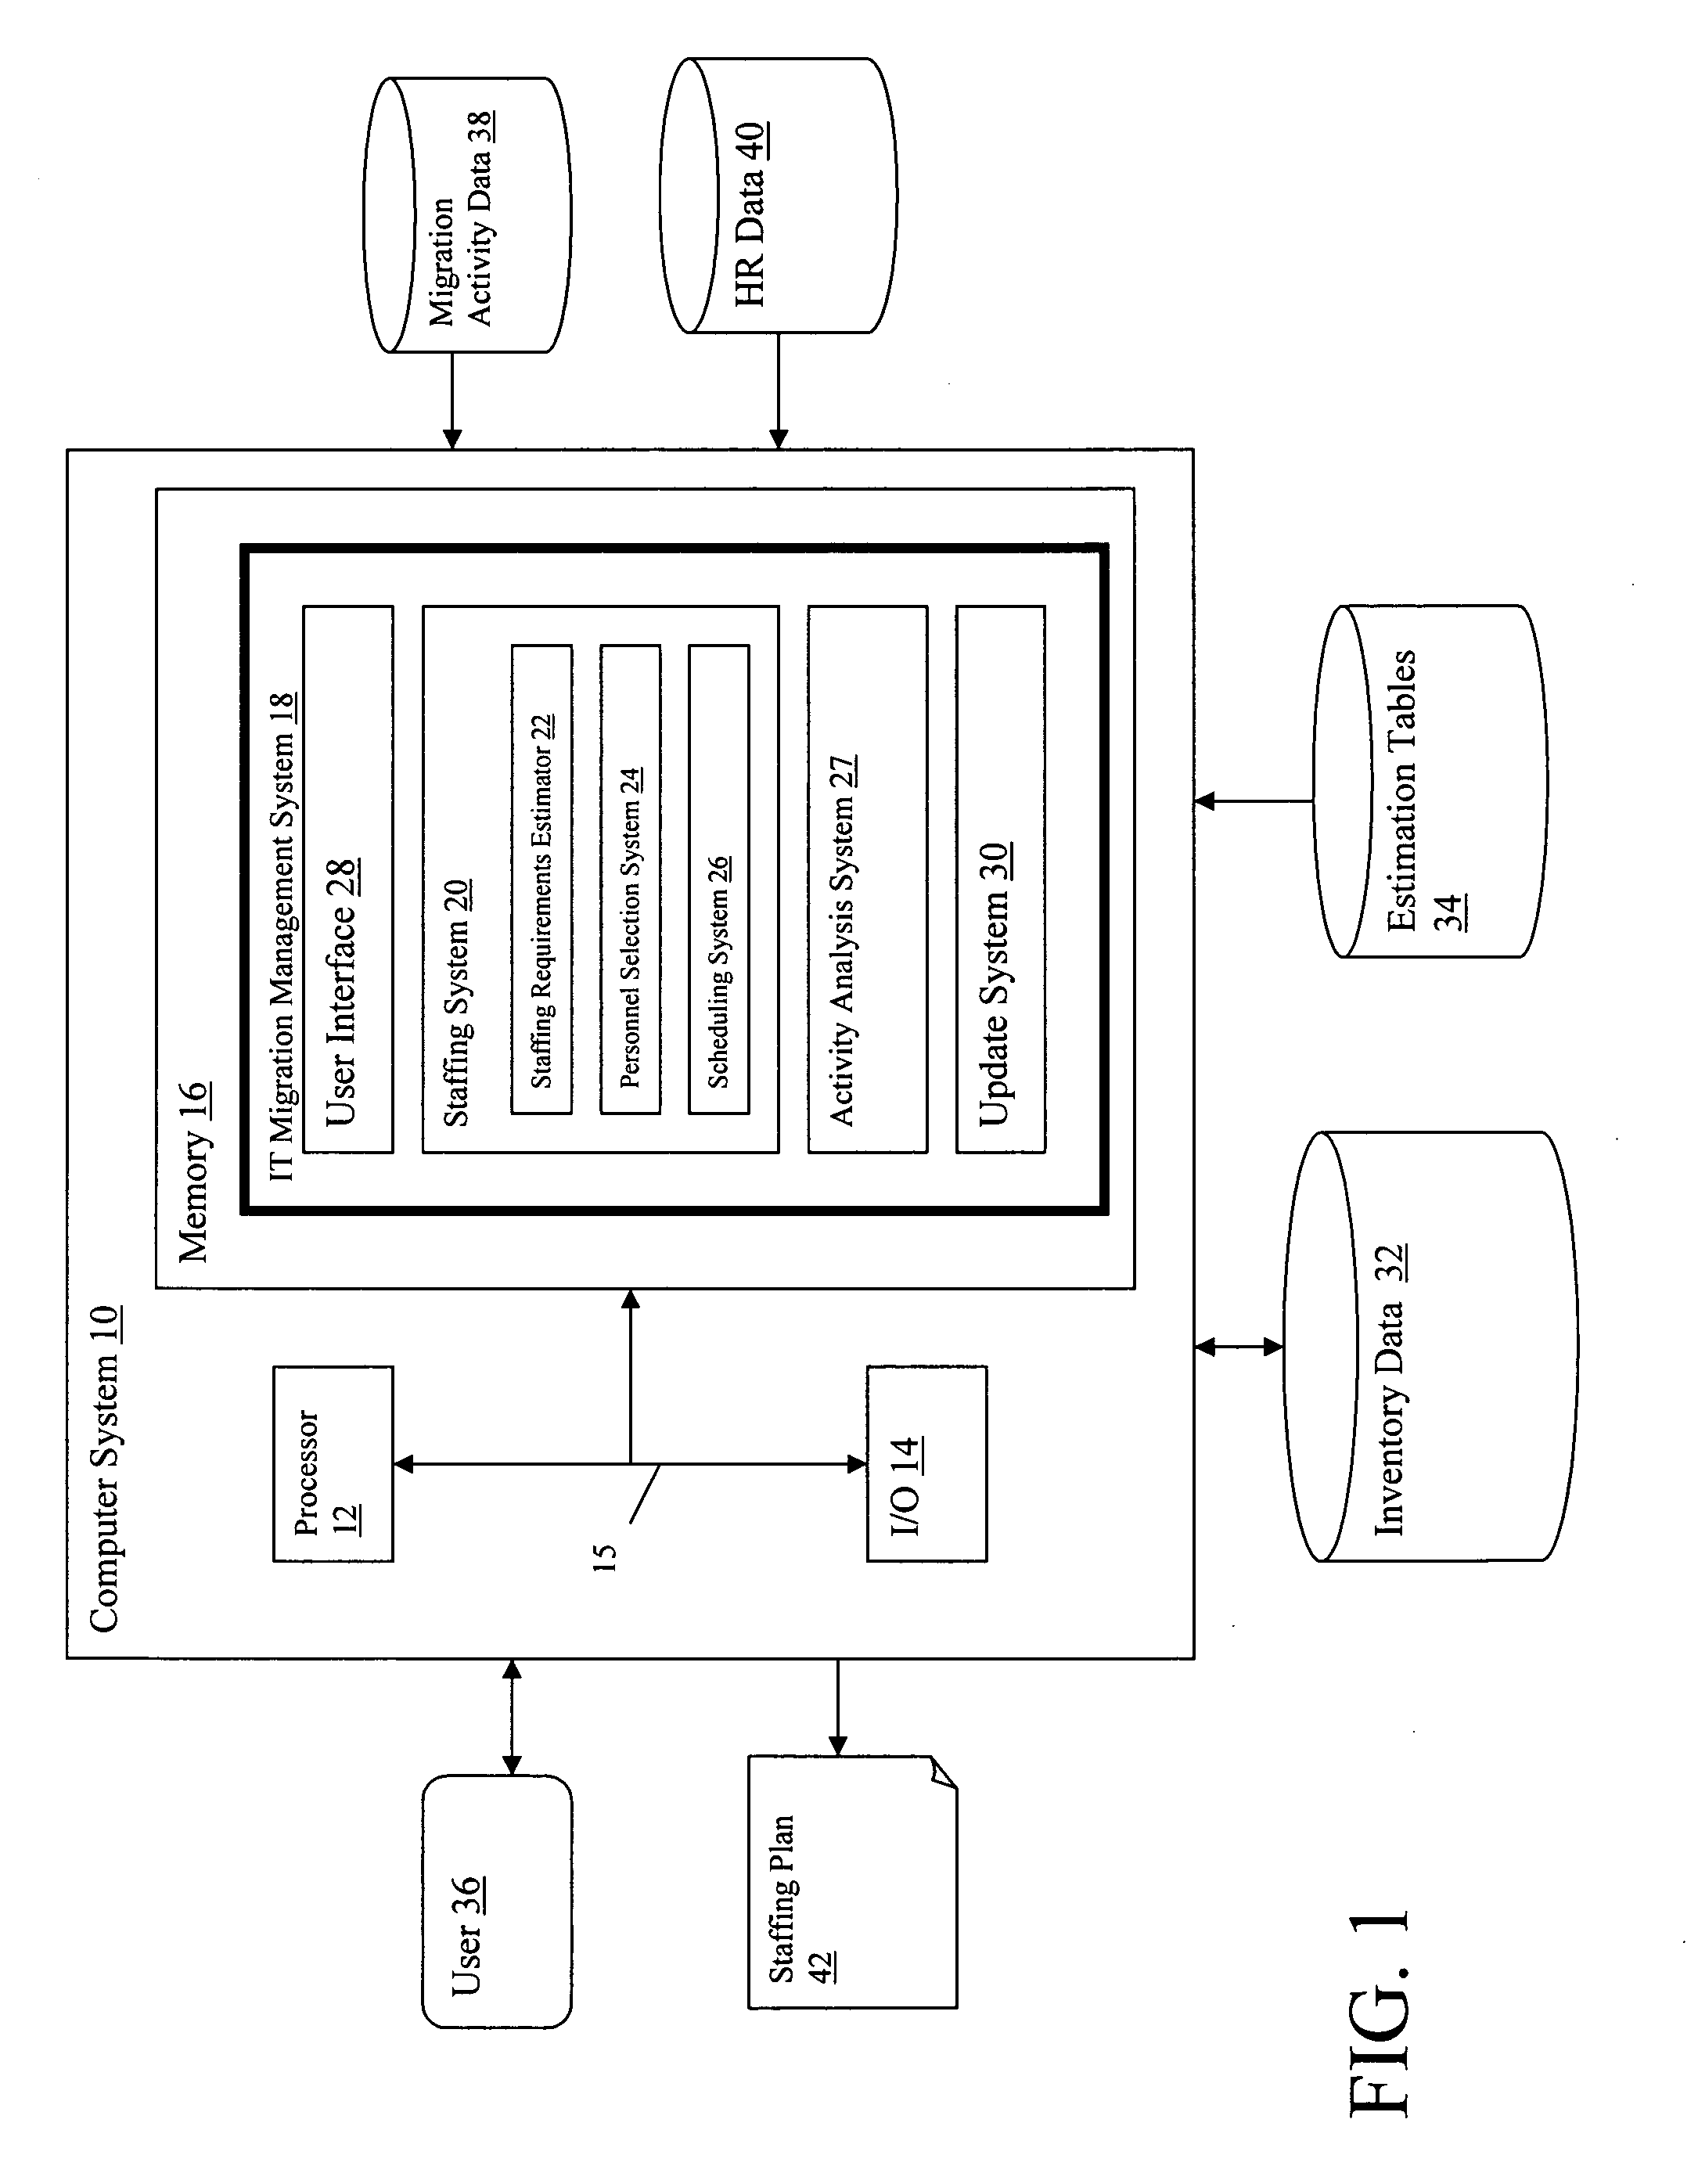 System and method for resource and cost planning of an IT migration